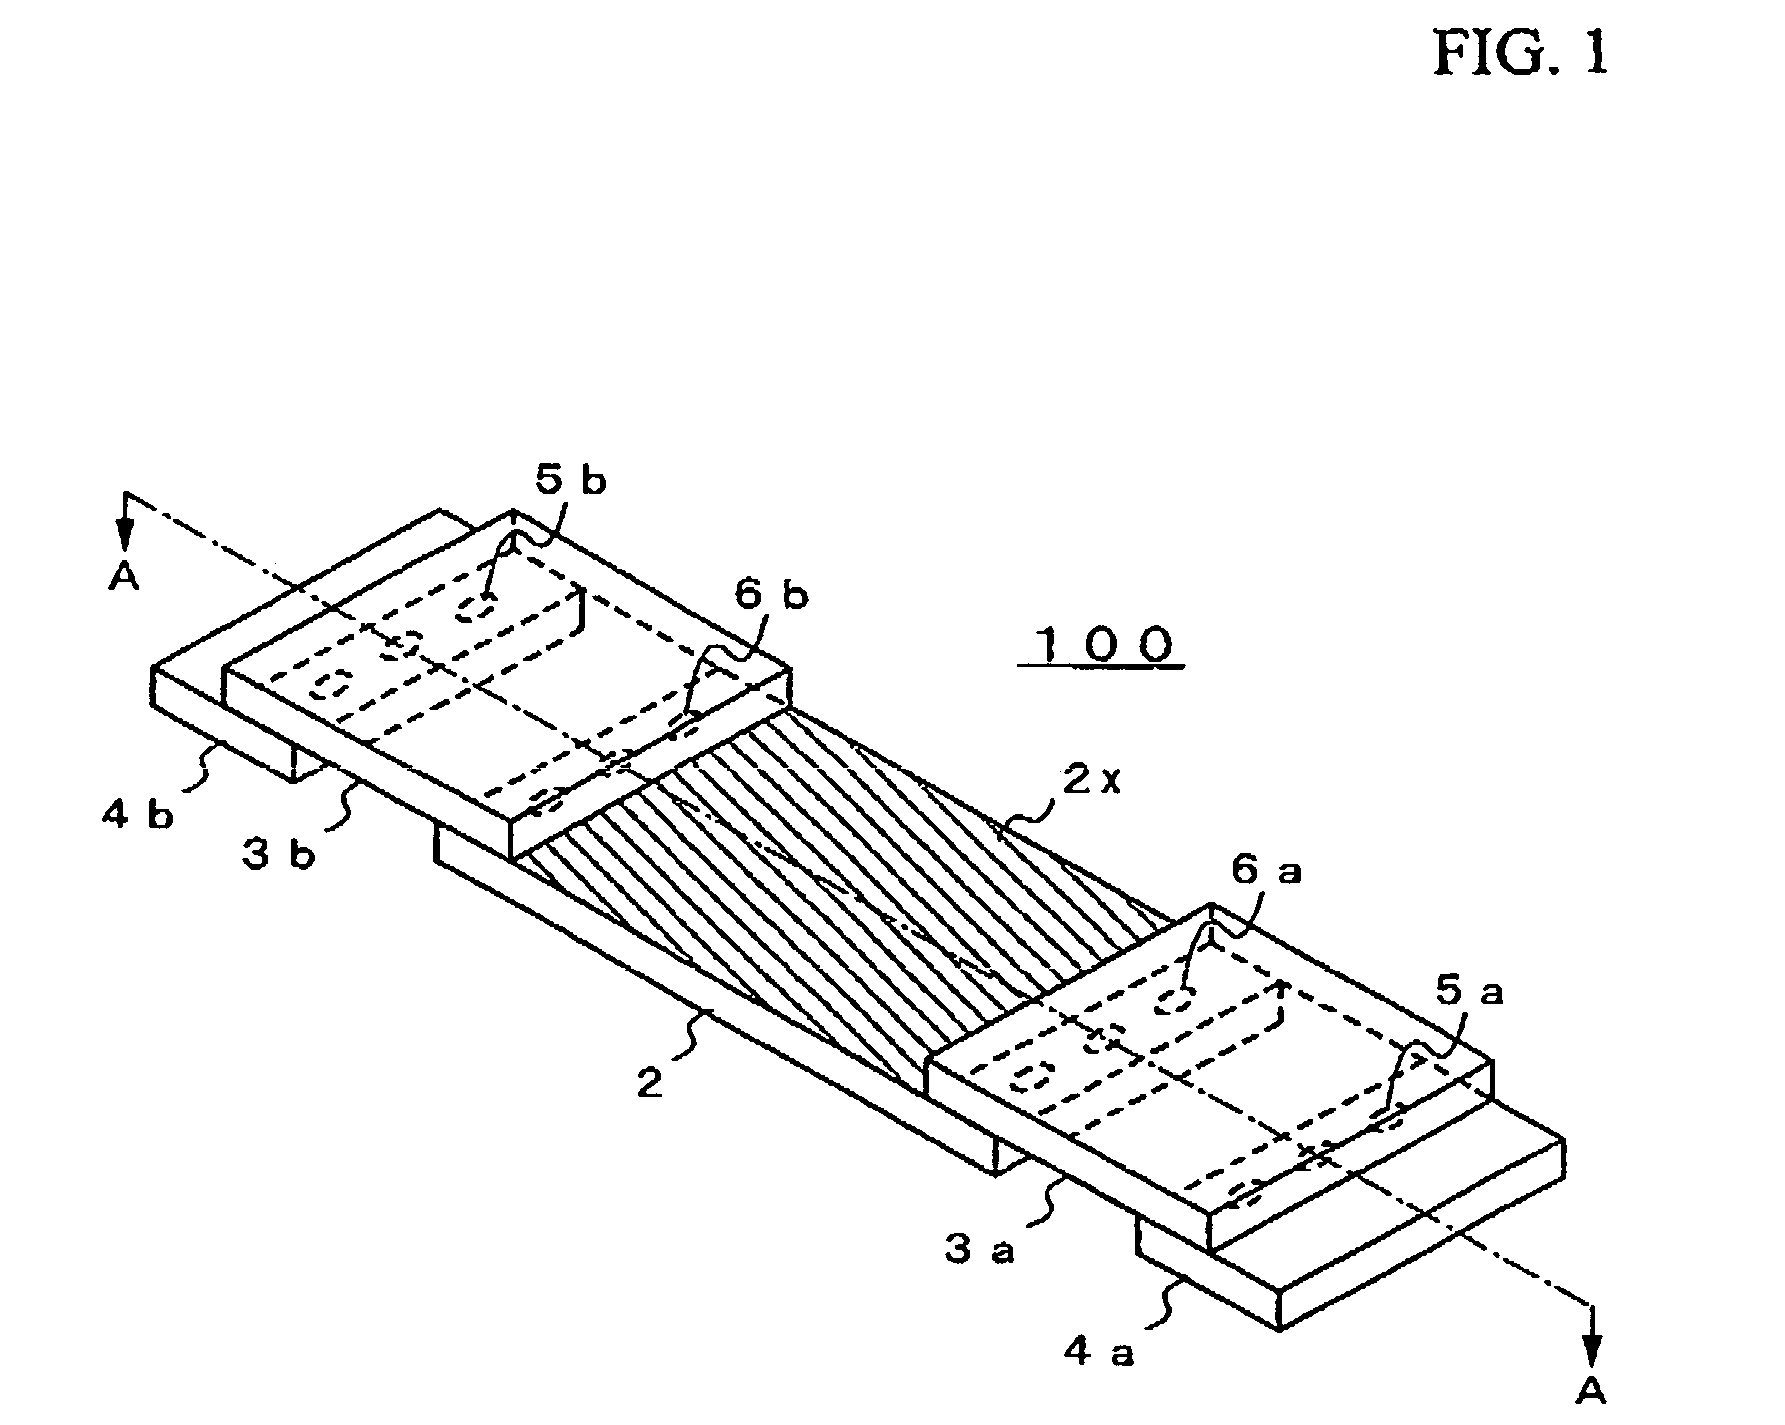 Solid electrolytic capacitor, circuit board having built-in solid electrolytic capacitor and methods for manufacturing them